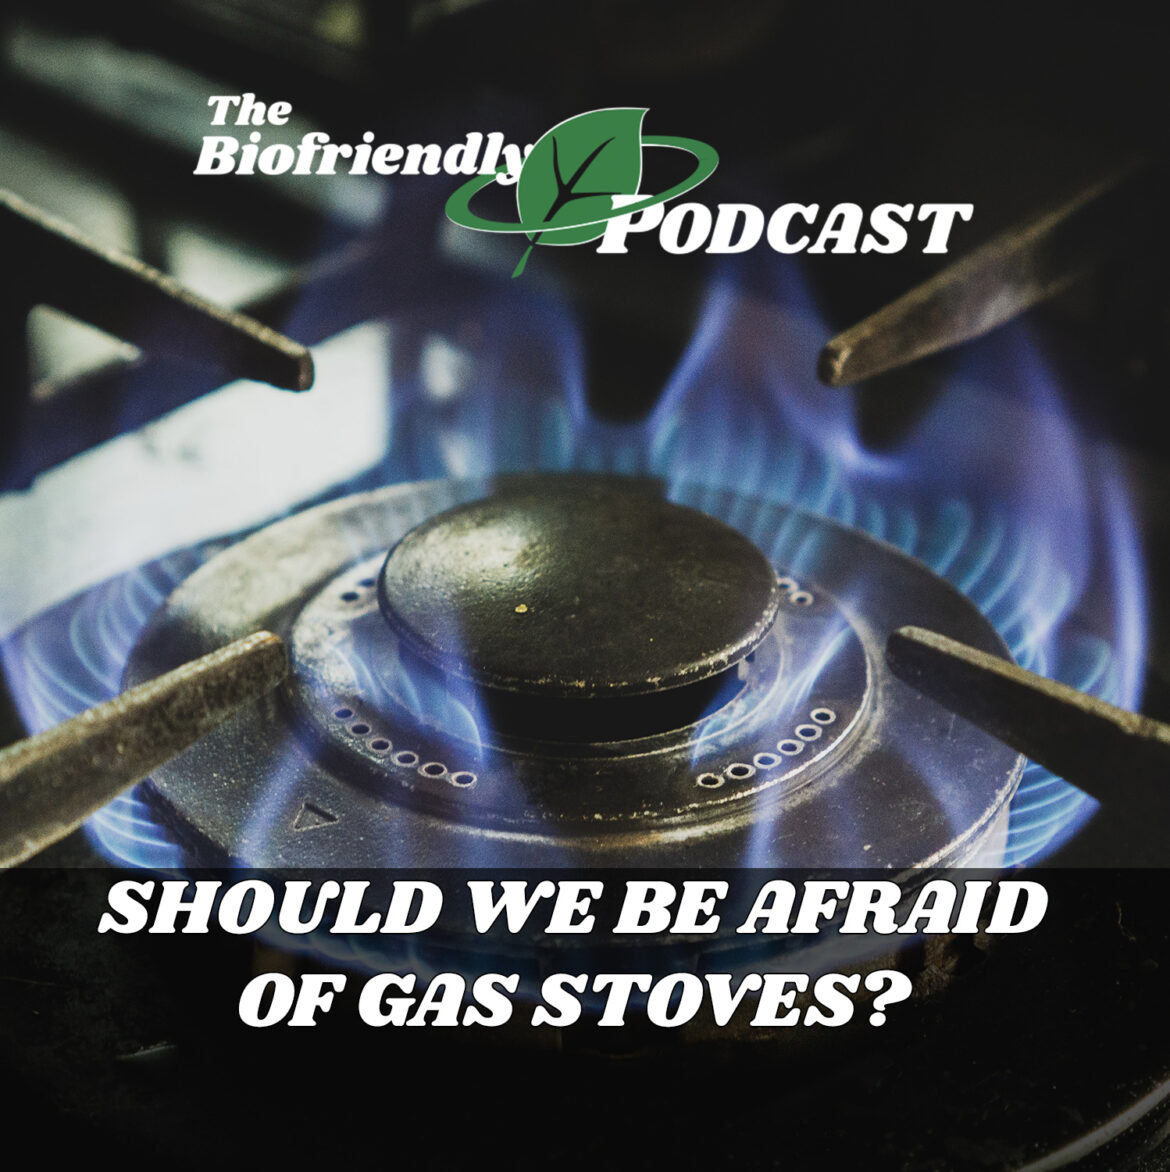 Should We Be Afraid of Gas Stoves?